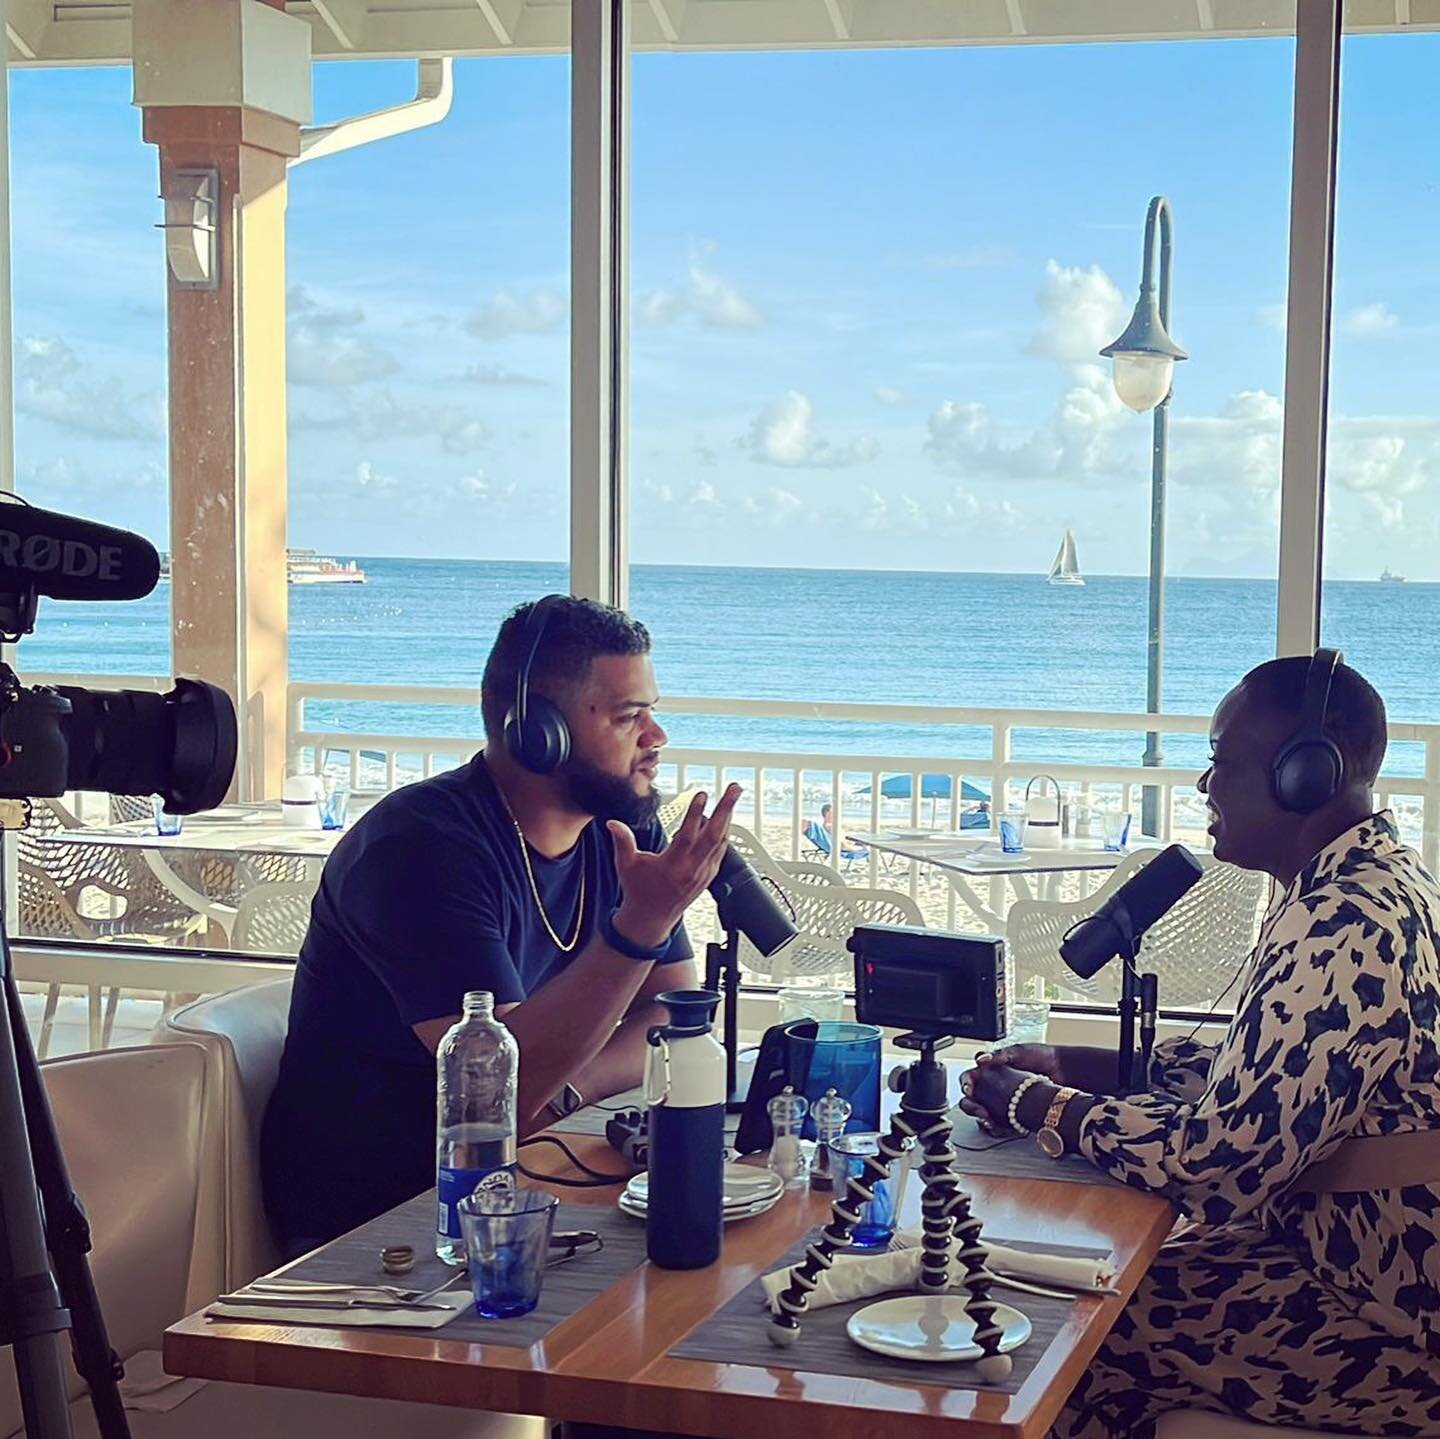 Sunside Kingdom Loading&hellip; Today was an amazing day! 

Connected with @ralph_cantave in the morning for an in-depth interview on my Web 3.0 &amp; my journey. 

Connected with @gcyinitiative for another interview on the entrepreneurial journey fr